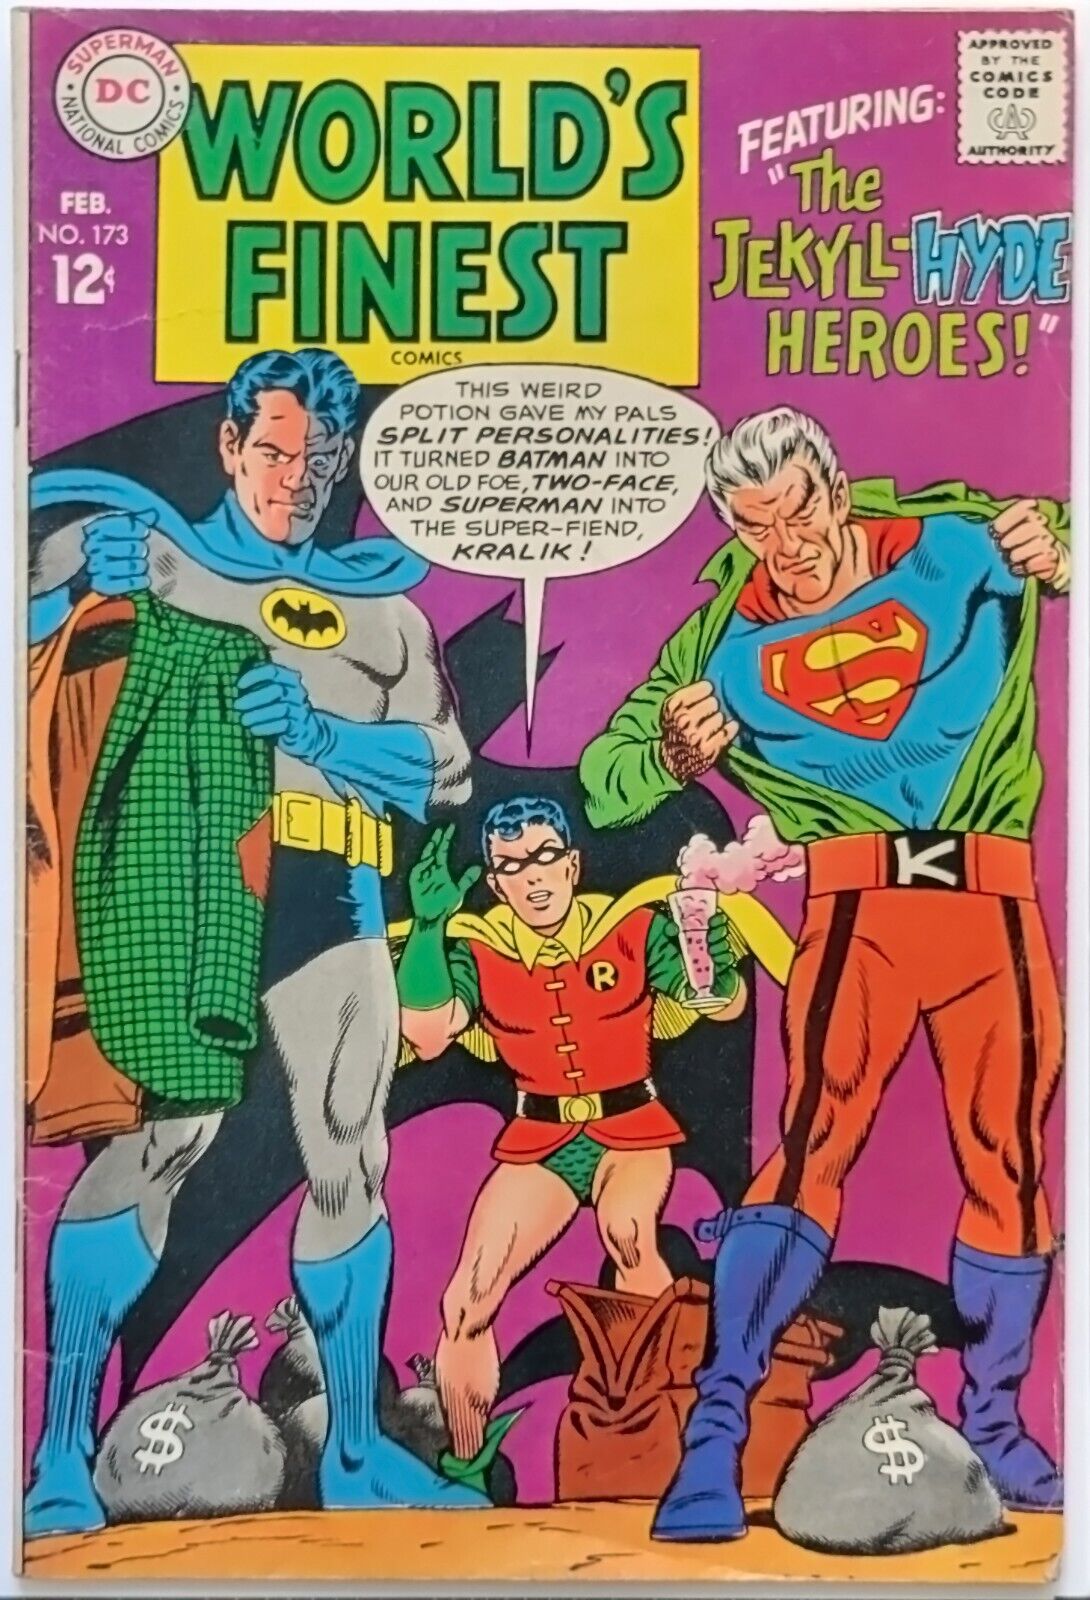 World\'s Finest #173 (1968) Vintage Key, 1st Silver Age Appearance of Two-Face